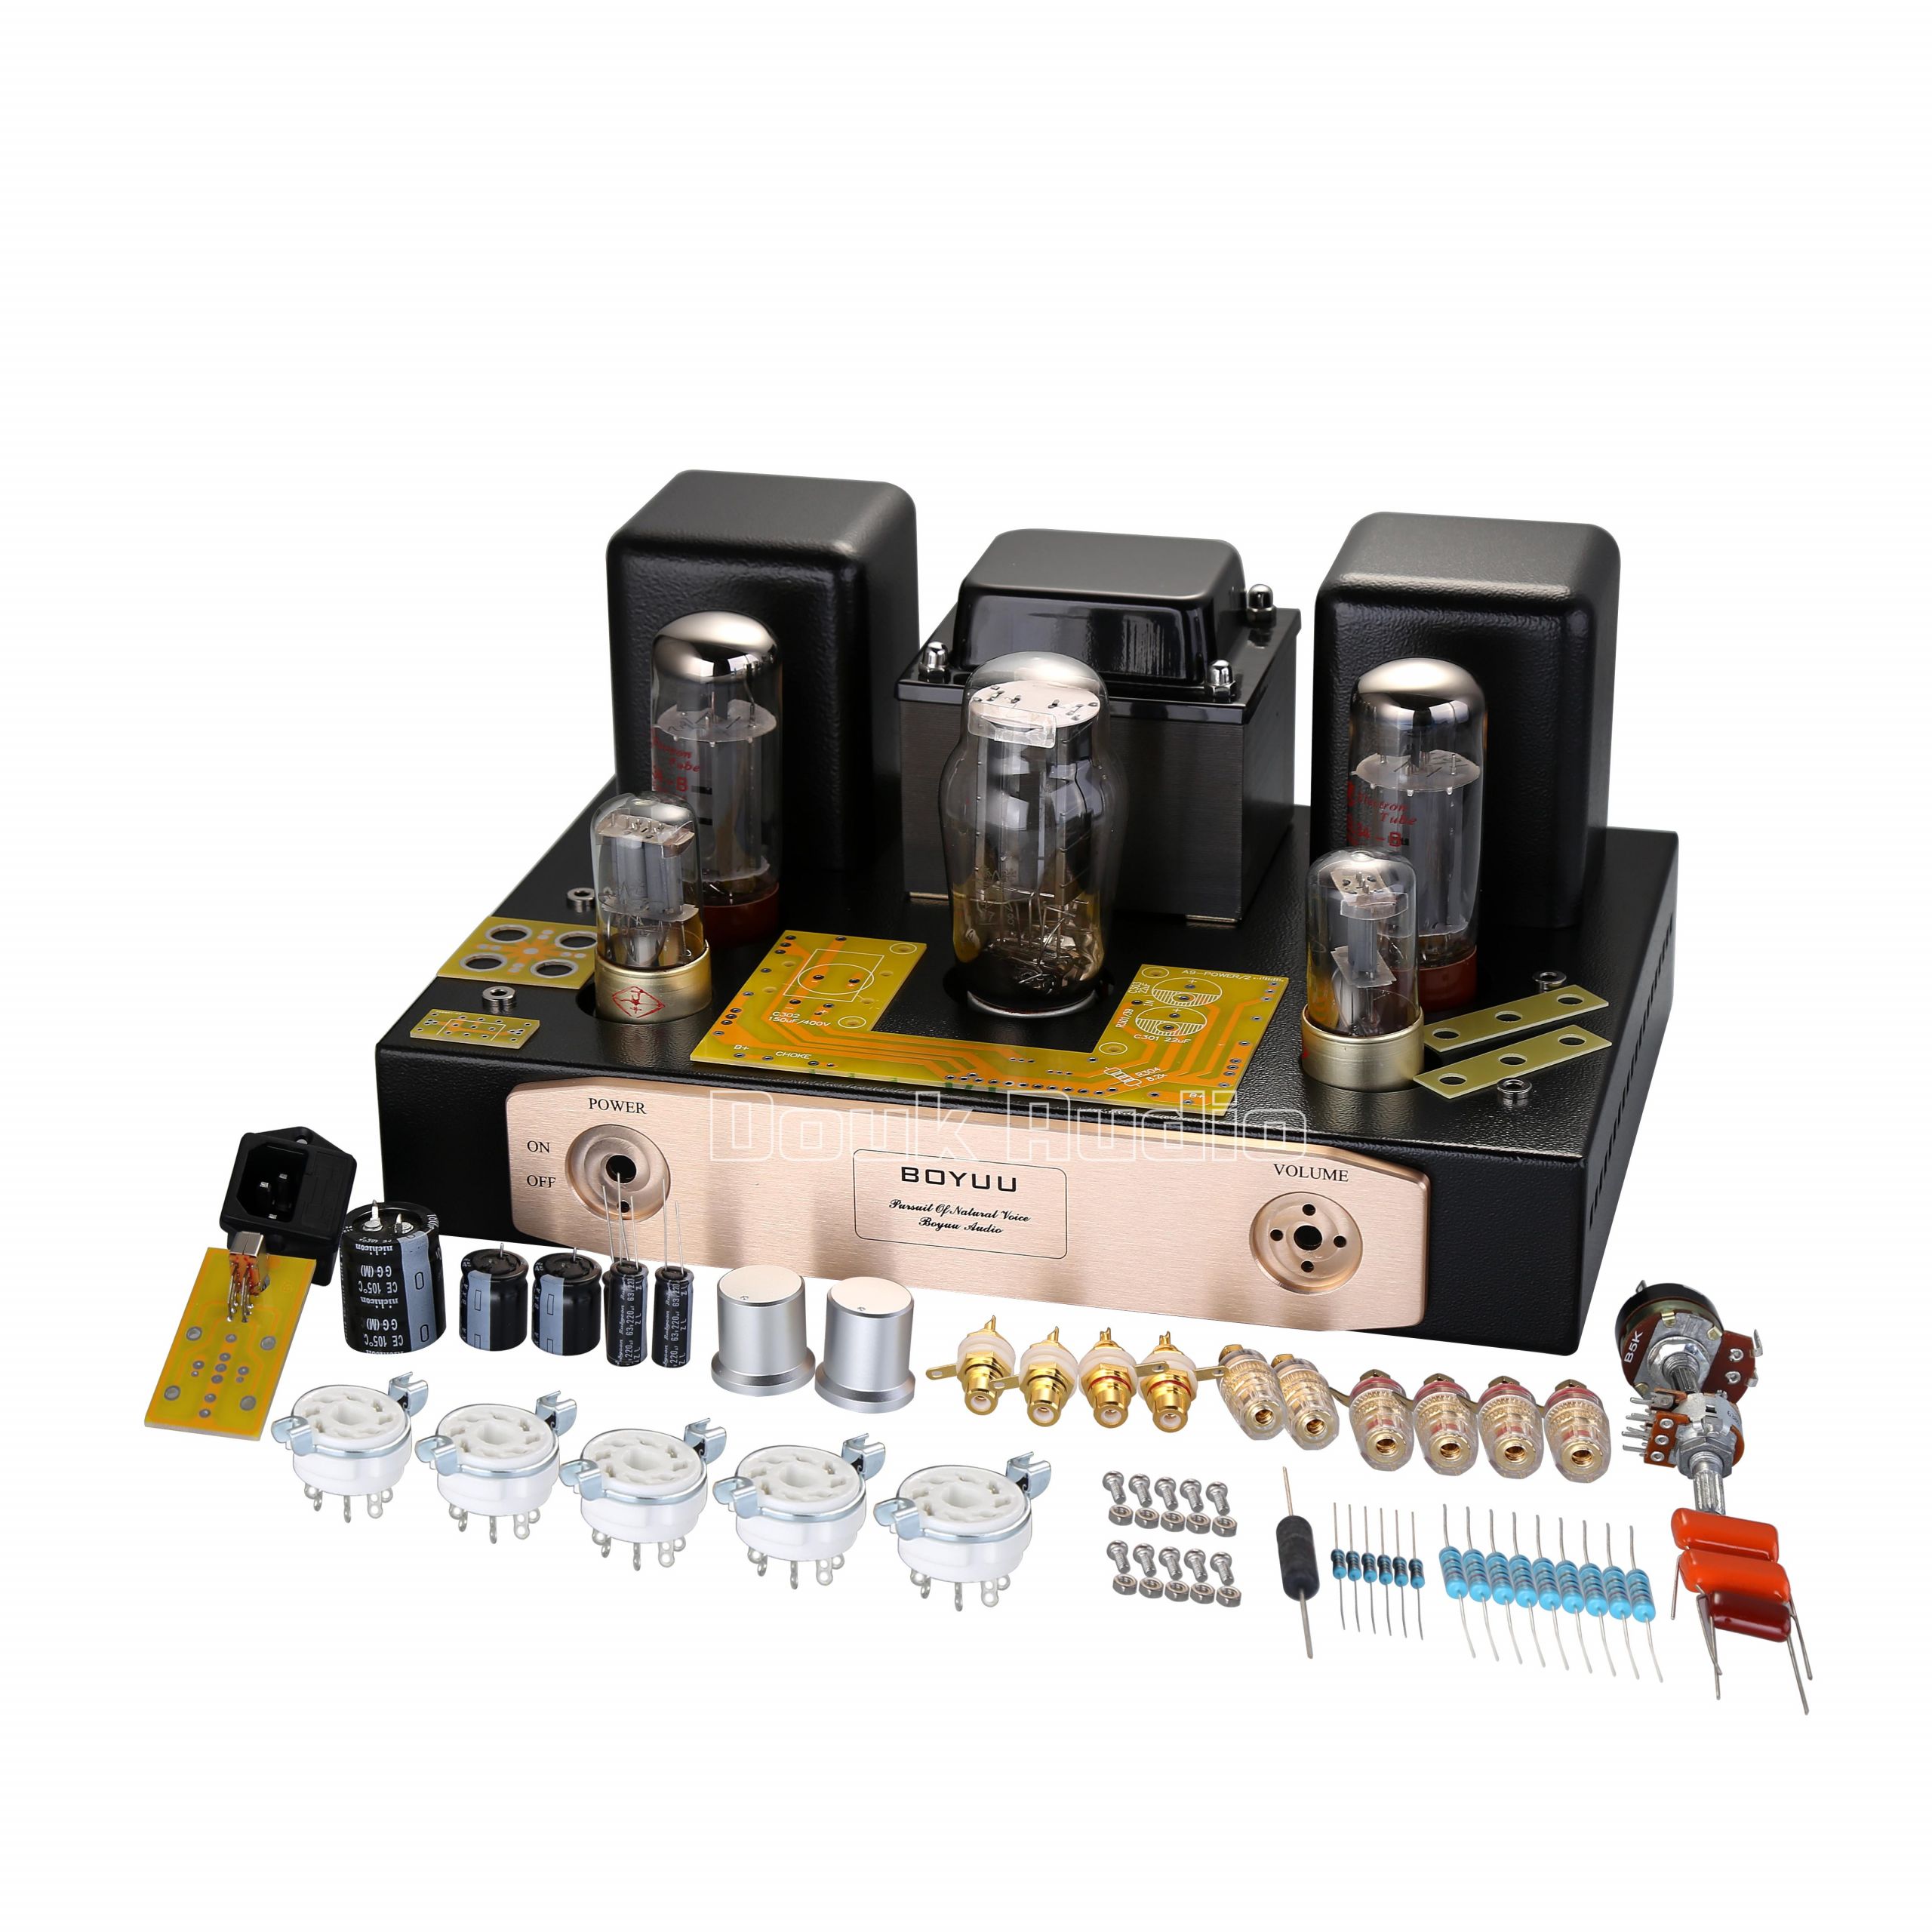 Top 23 Diy Stereo Tube Amp Kit Home, Family, Style and